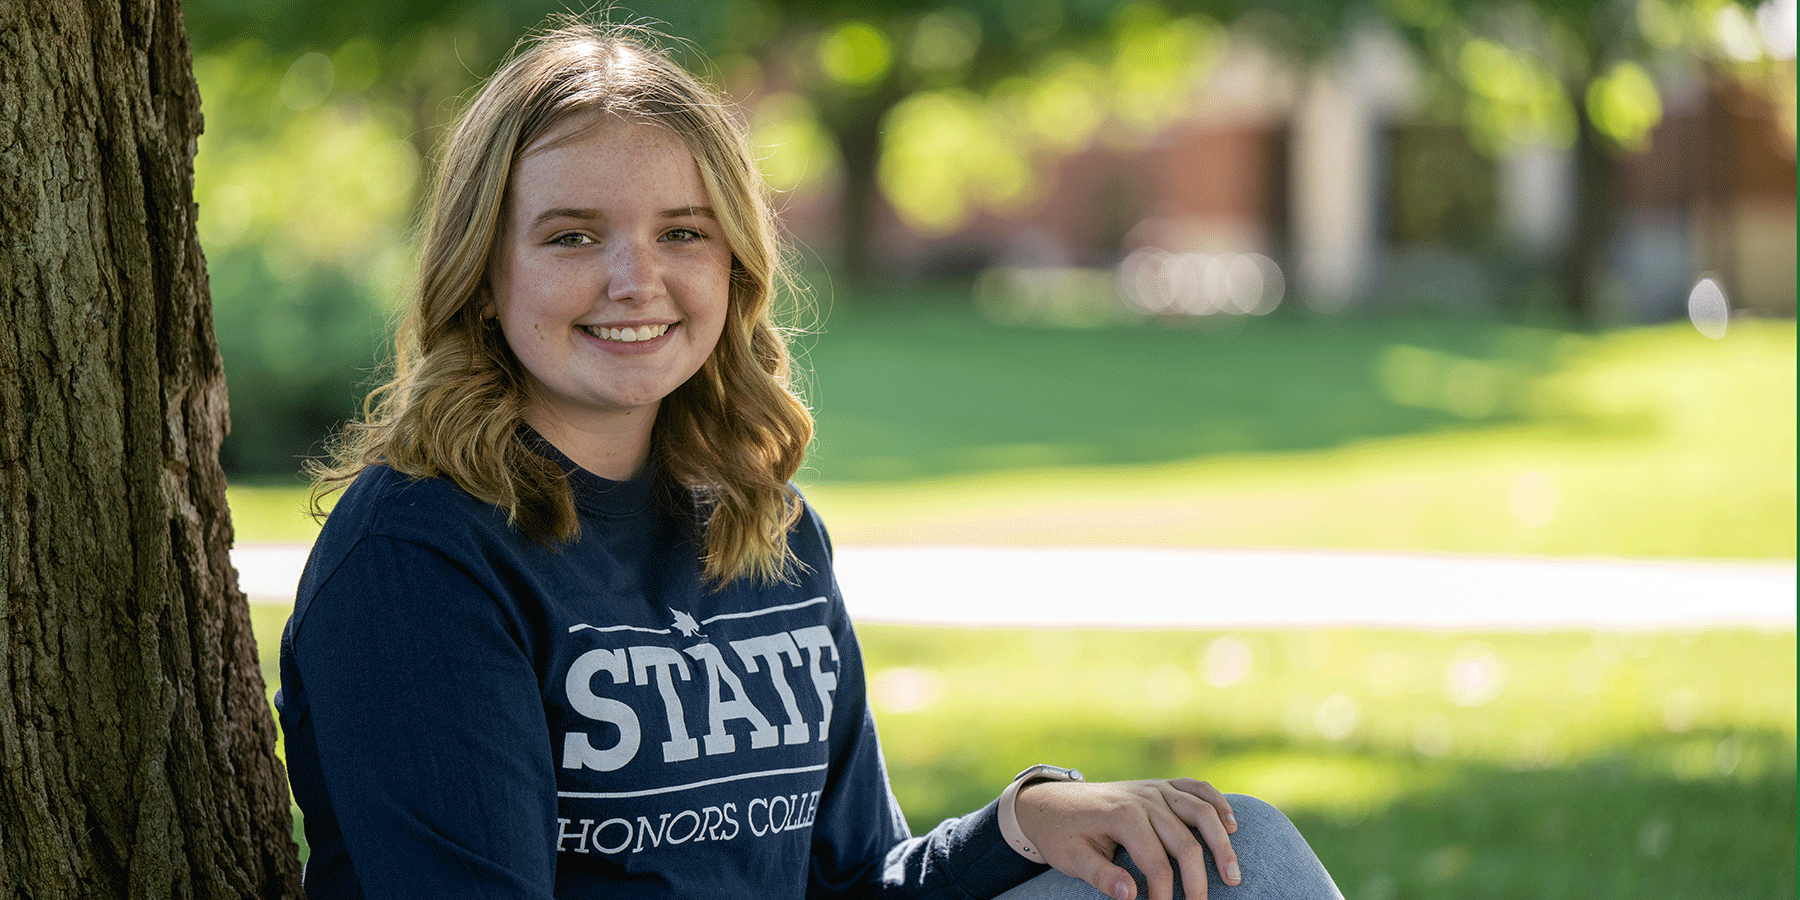 A female student with curly blonde hair sits with her back to a tree. She wears a blue long-sleeved STATE Honors College shirt and blue jeans. 